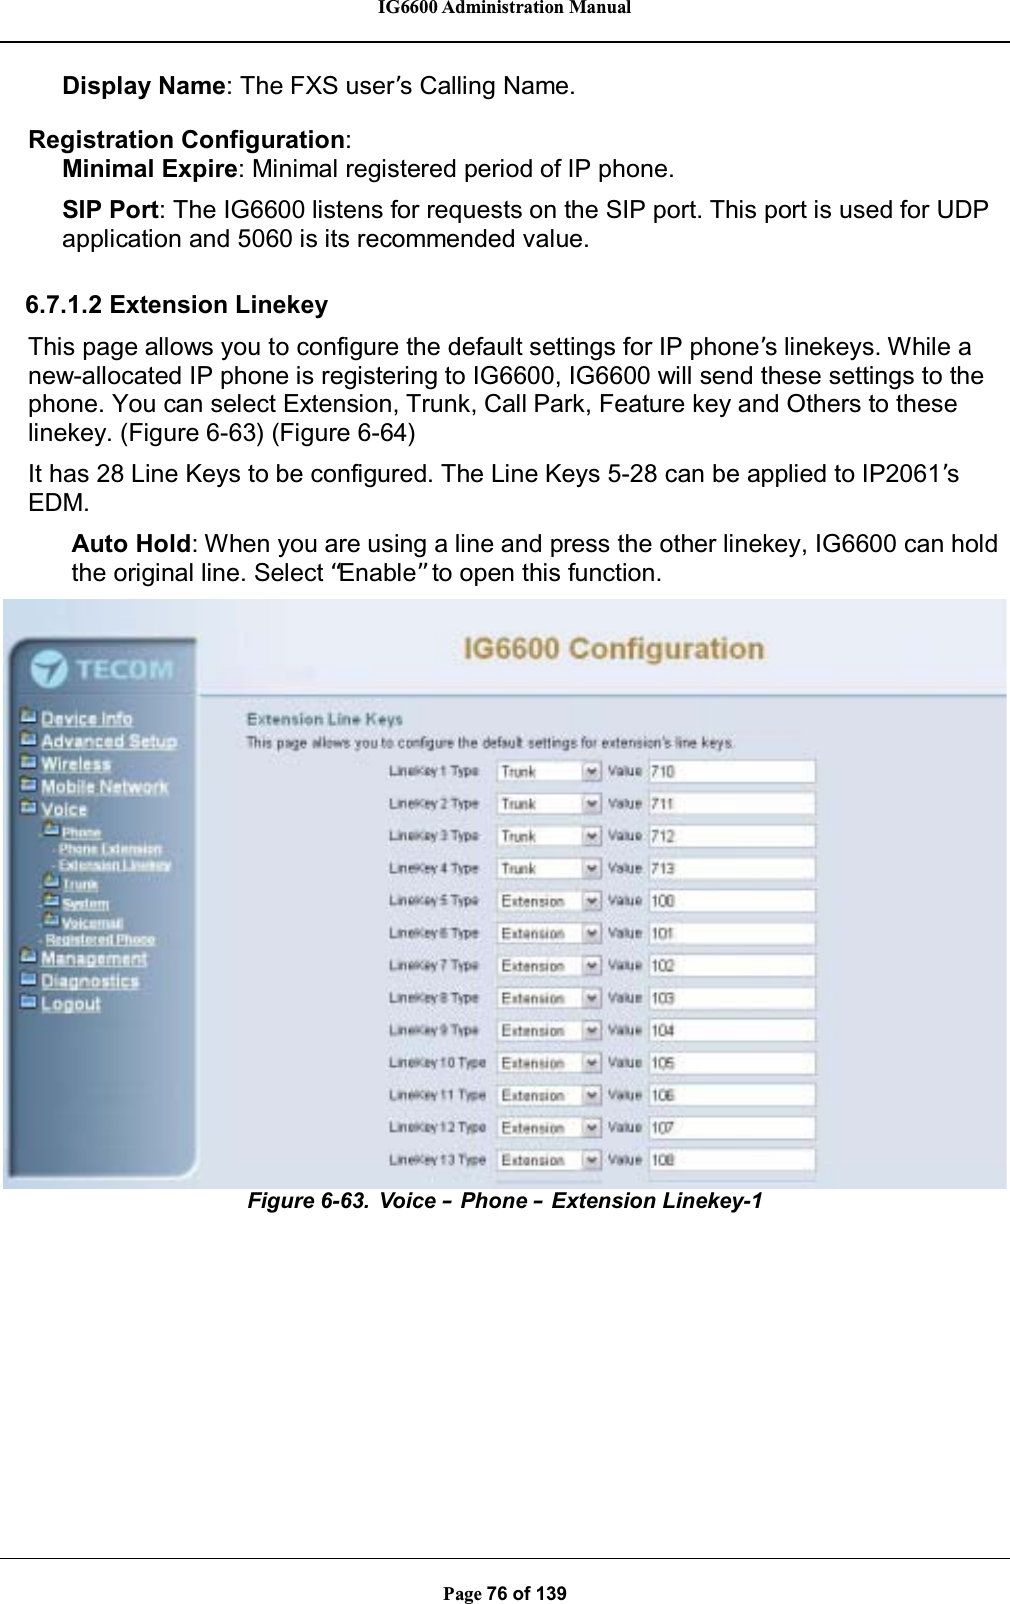 IG6600 Administration ManualPage 76 of 139Display Name: The FXS user’sCallingName.Registration Configuration:Minimal Expire: Minimal registered period of IP phone.SIP Port: The IG6600 listens for requests on the SIP port. This port is used for UDPapplication and 5060 is its recommended value.6.7.1.2 Extension LinekeyThis page allows you to configure the default settings for IP phone’s linekeys. While anew-allocated IP phone is registering to IG6600, IG6600 will send these settings to thephone. You can select Extension, Trunk, Call Park, Feature key and Others to theselinekey. (Figure 6-63) (Figure 6-64)It has 28 Line Keys to be configured. The Line Keys 5-28 can be applied to IP2061’sEDM.Auto Hold: When you are using a line and press the other linekey, IG6600 can holdthe original line. Select “Enable”to open this function.Figure 6-63. Voice –Phone –Extension Linekey-1